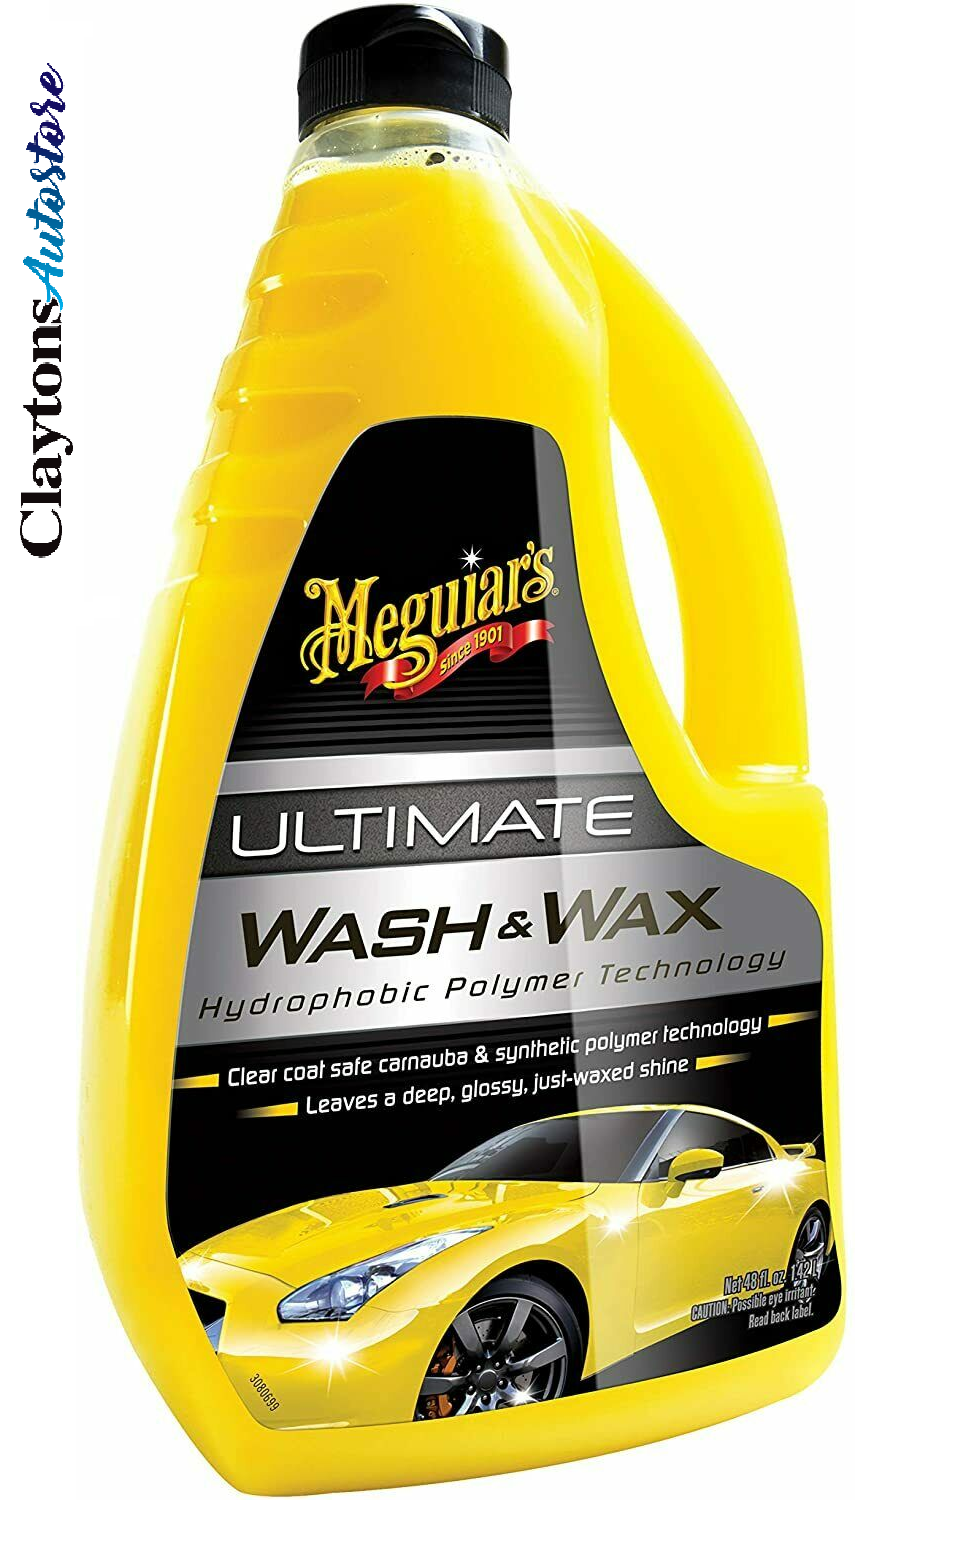 Ultimate Wash And Wax 1.4L Car Shampoo Car Care Cleaning